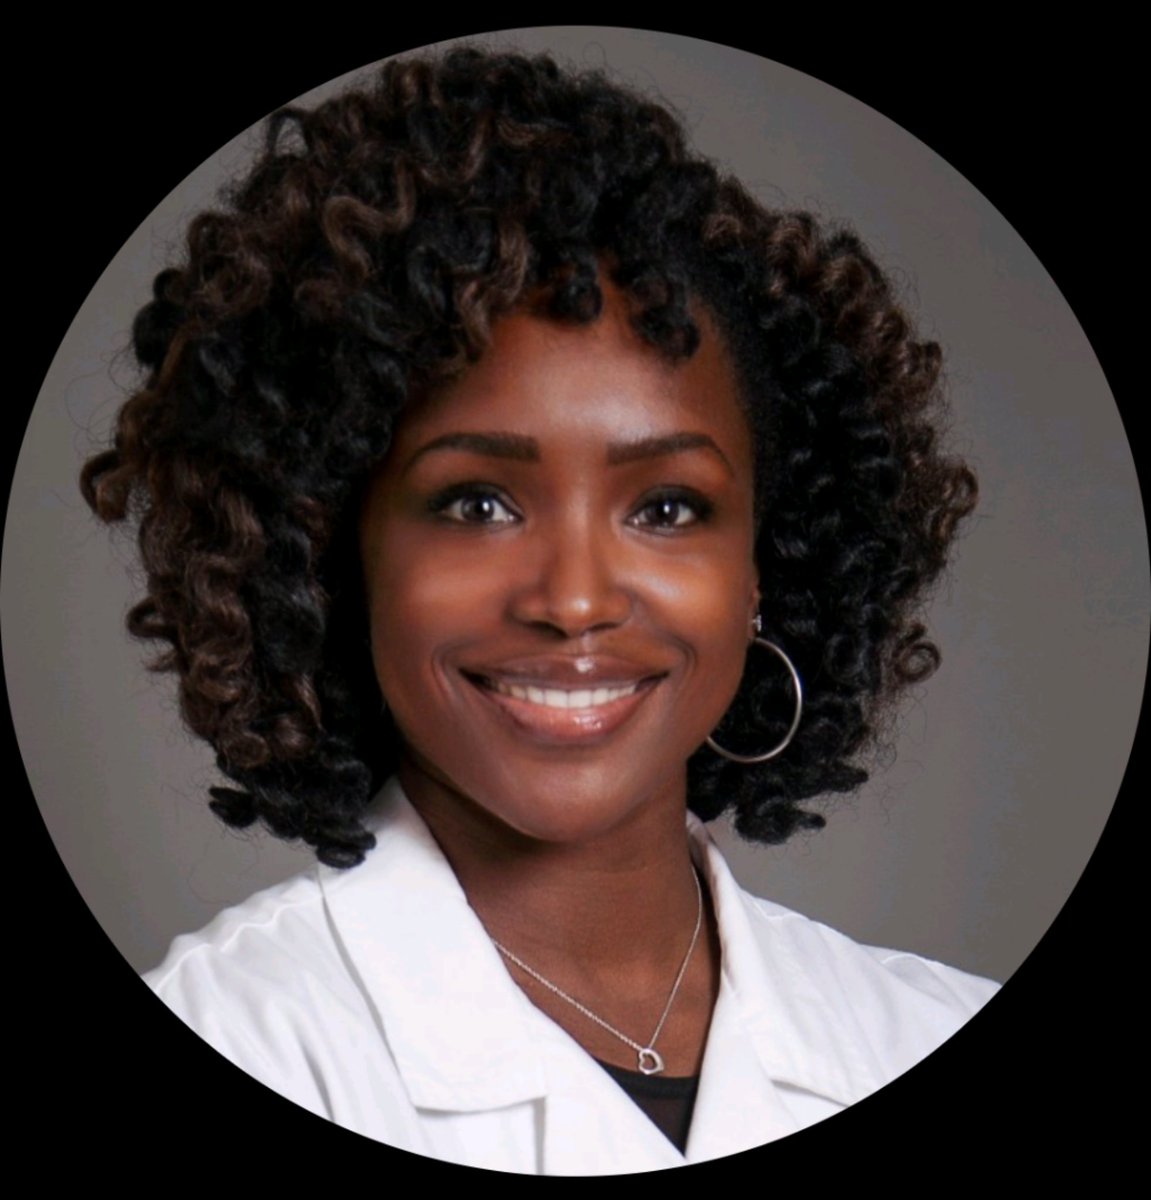 We congratulate Dr. Arlene Richardson for receiving the Diagnostic Humanitarian Award from the Imaging Wire! We thank Dr. Richardson for her contributions to #globalhealthradiology both locally in Chicago and globally as the Director of RAD-AID Tanzania! bit.ly/3DIJqM1